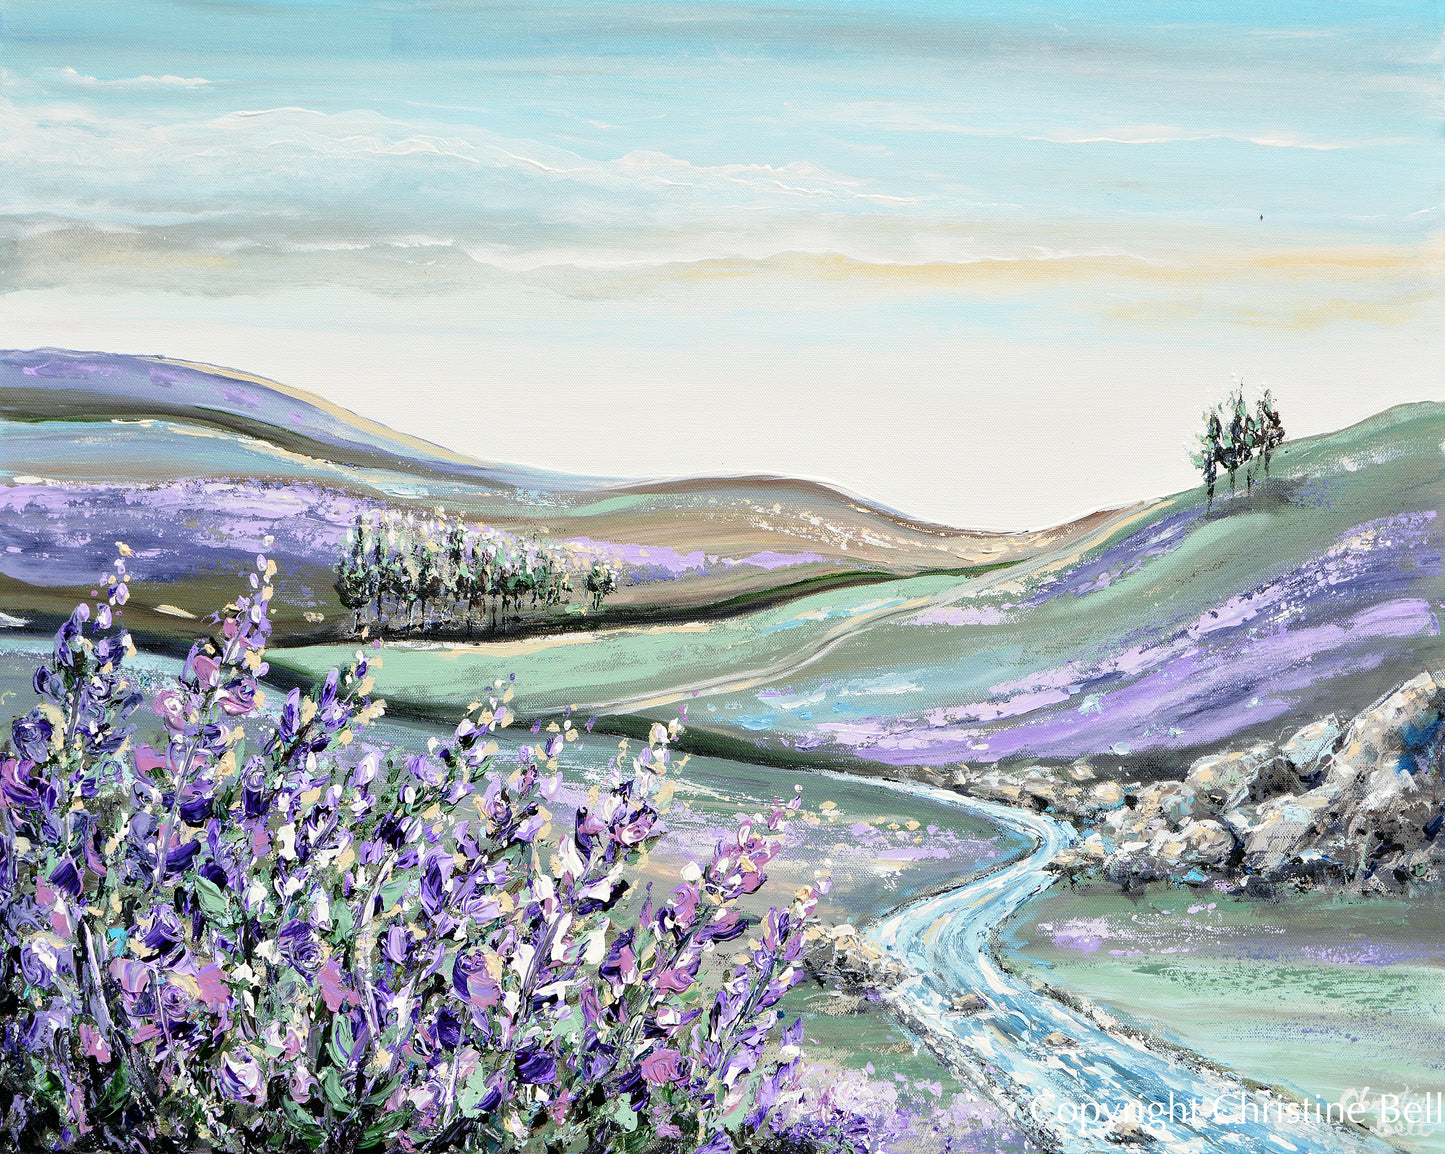 "Laced in Lavender" GICLEE PRINT Art Abstract Landscape Painting Lavender Field Flowers River Horizon